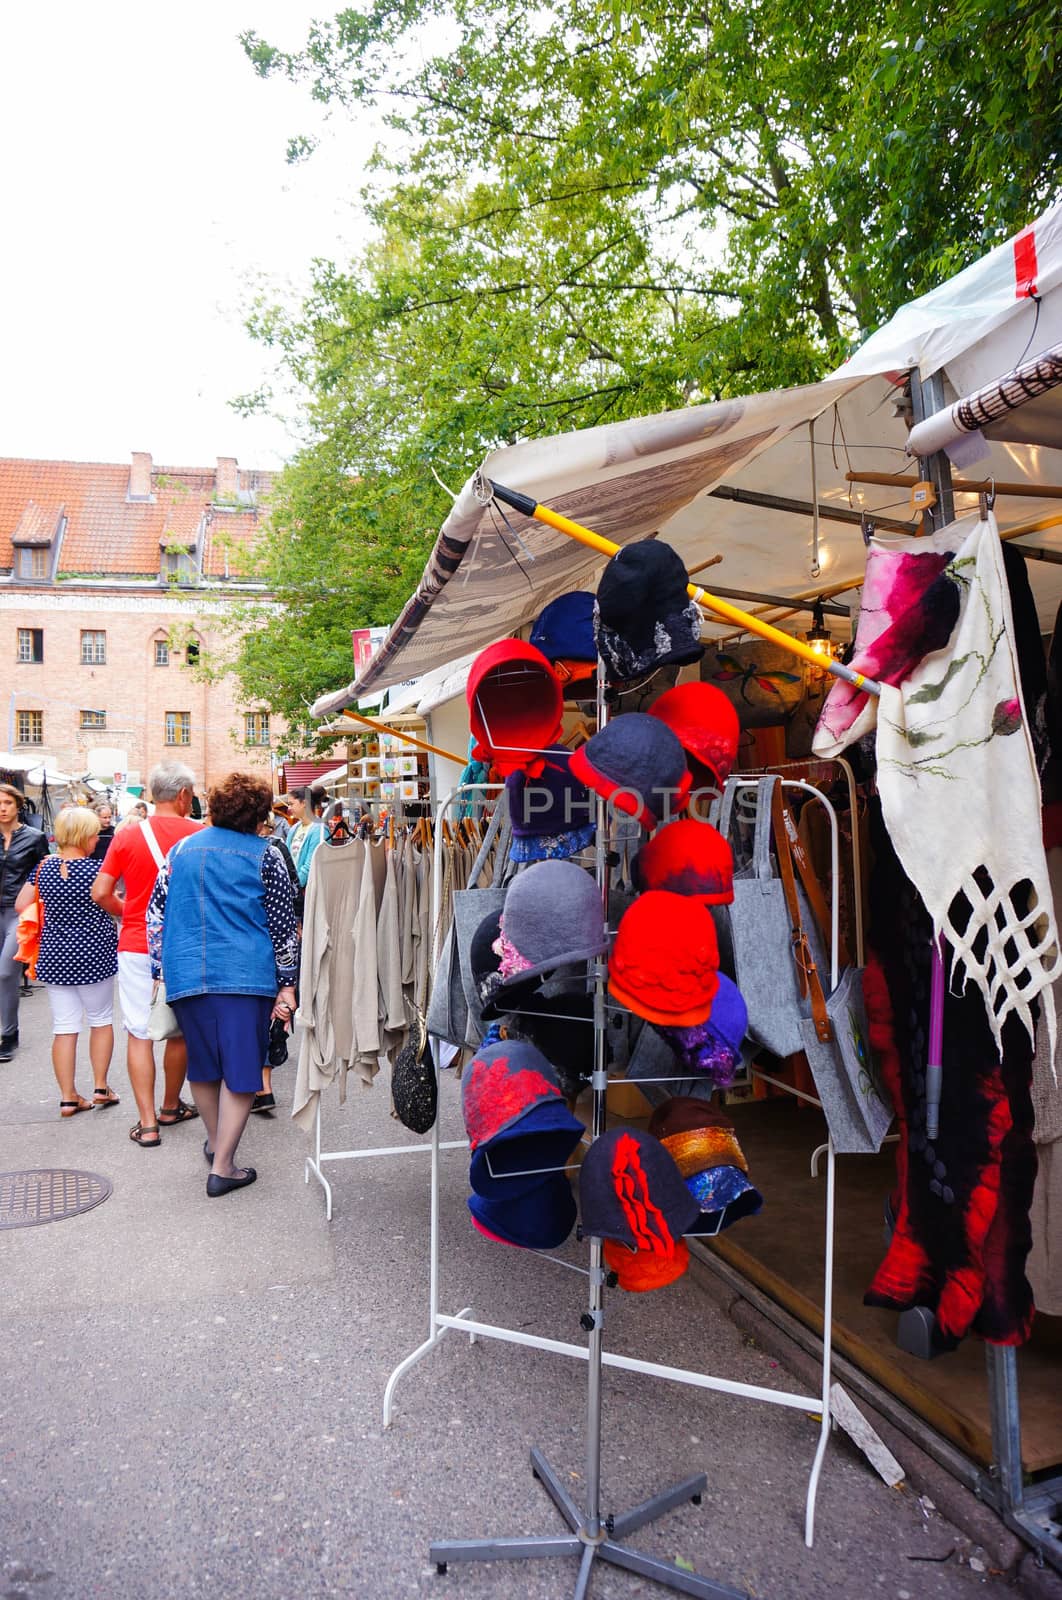 GDANSK, POLAND - JULY 29, 2015: Clothes and hats for sale at a market